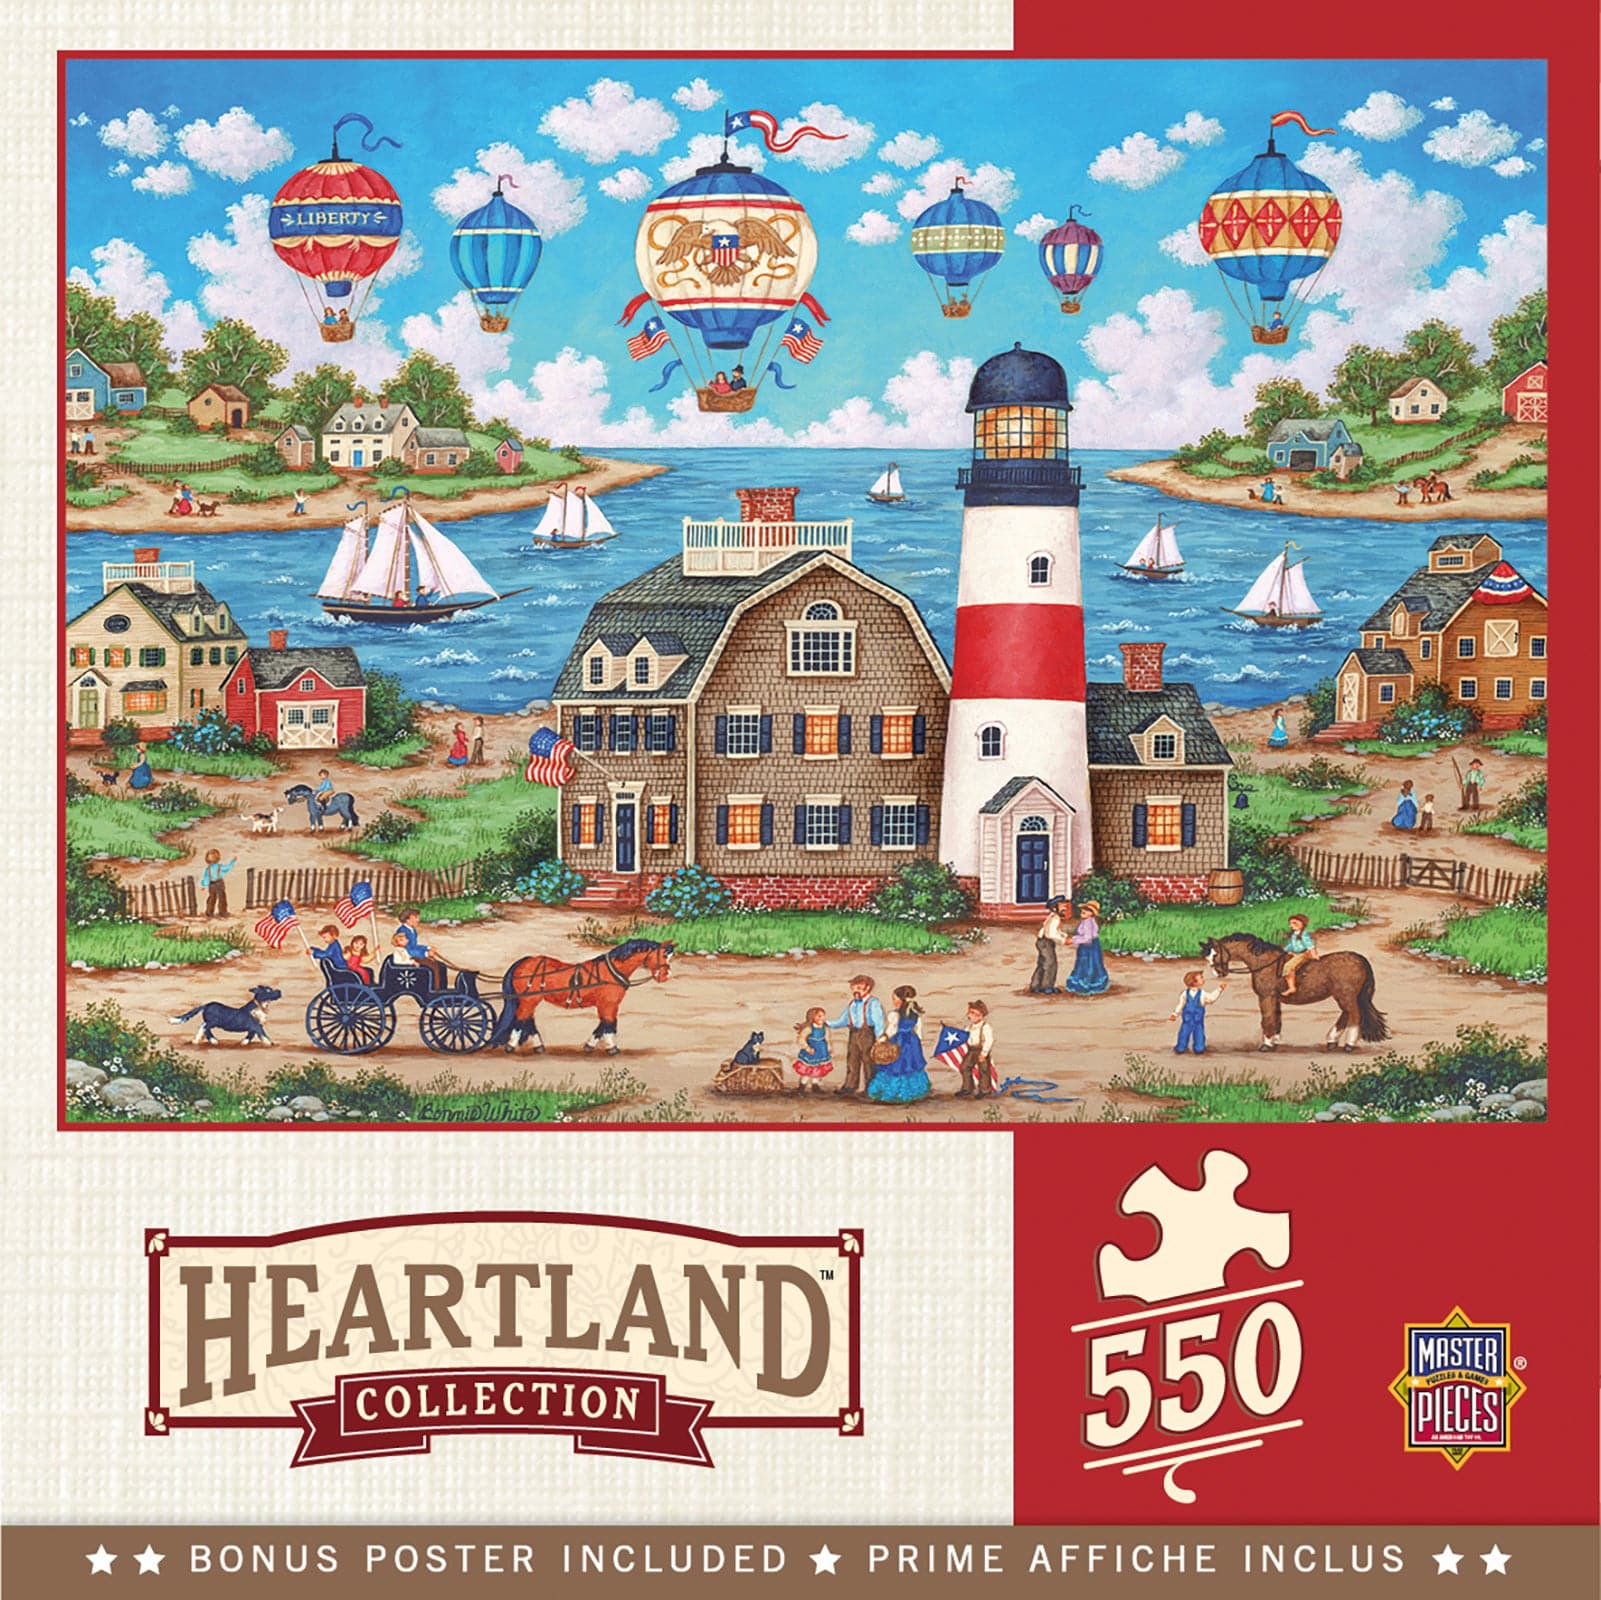 MasterPieces-Heartland Collection - Balloons Over the Bay - 550 Piece Puzzle-32049-Legacy Toys